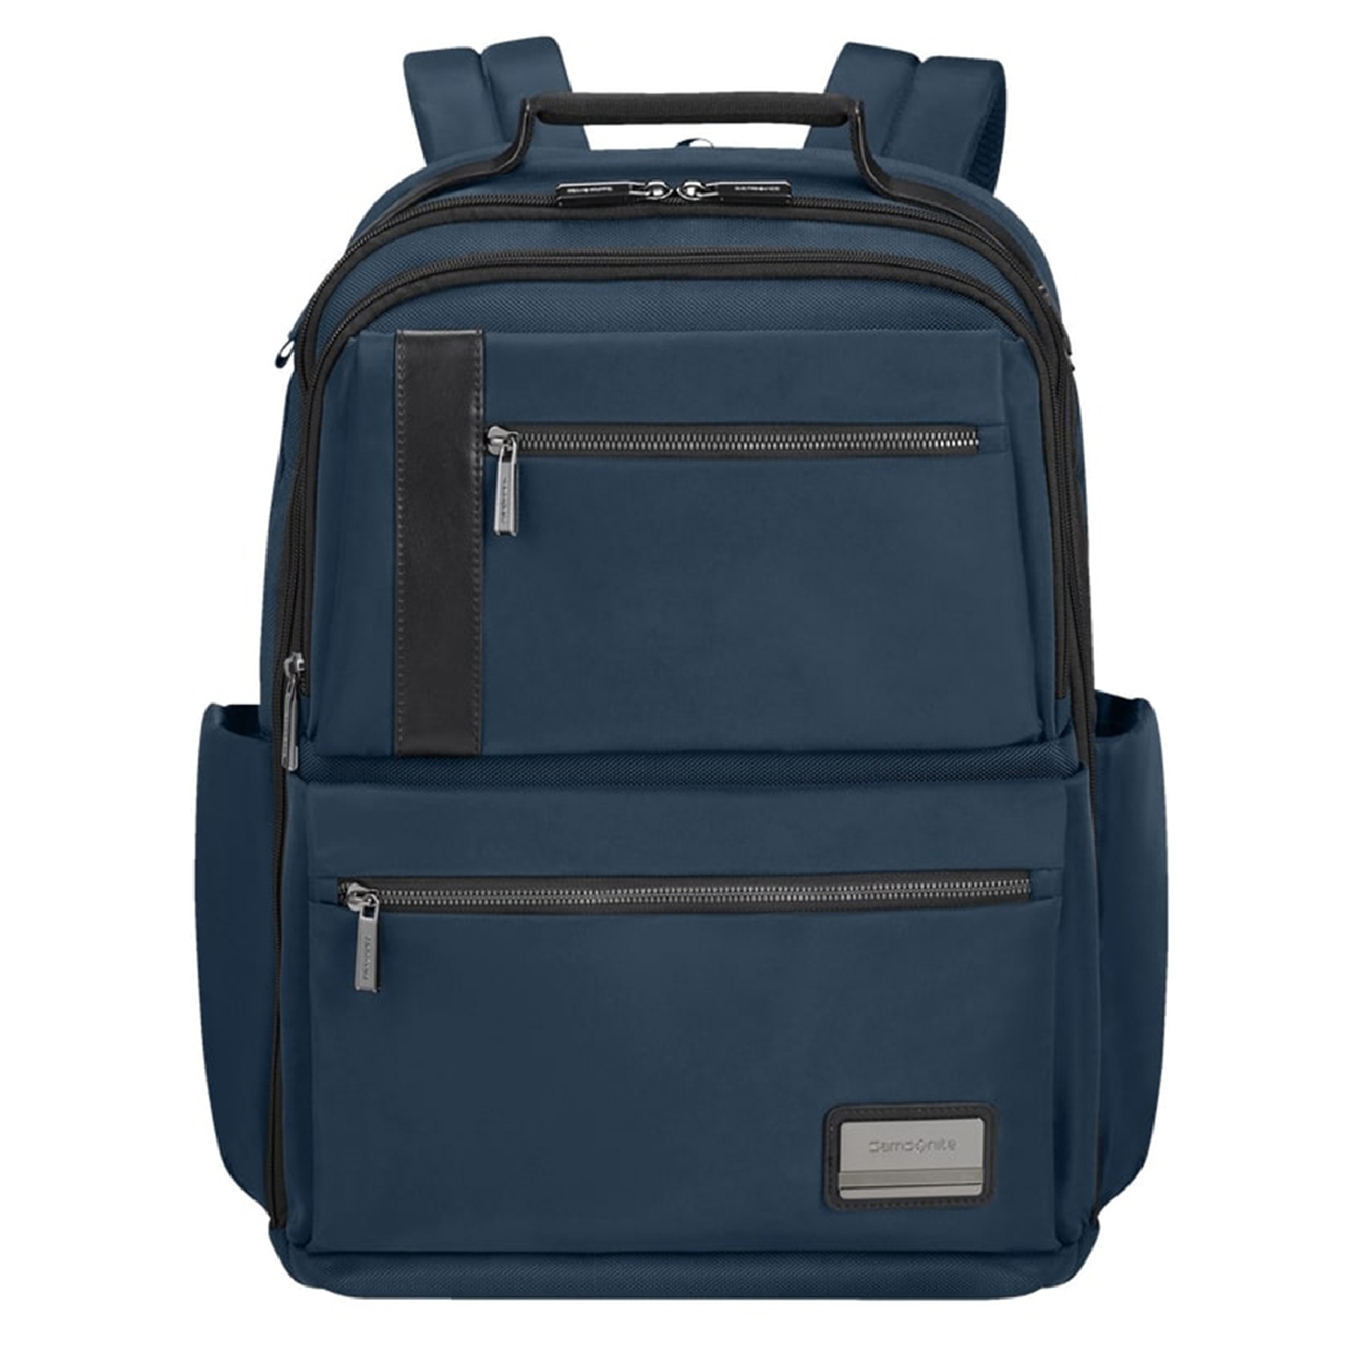 Samsonite Openroad 2.0 Laptop Backpack 17.3&apos;&apos; + Cloth. Comp cool blue backpack